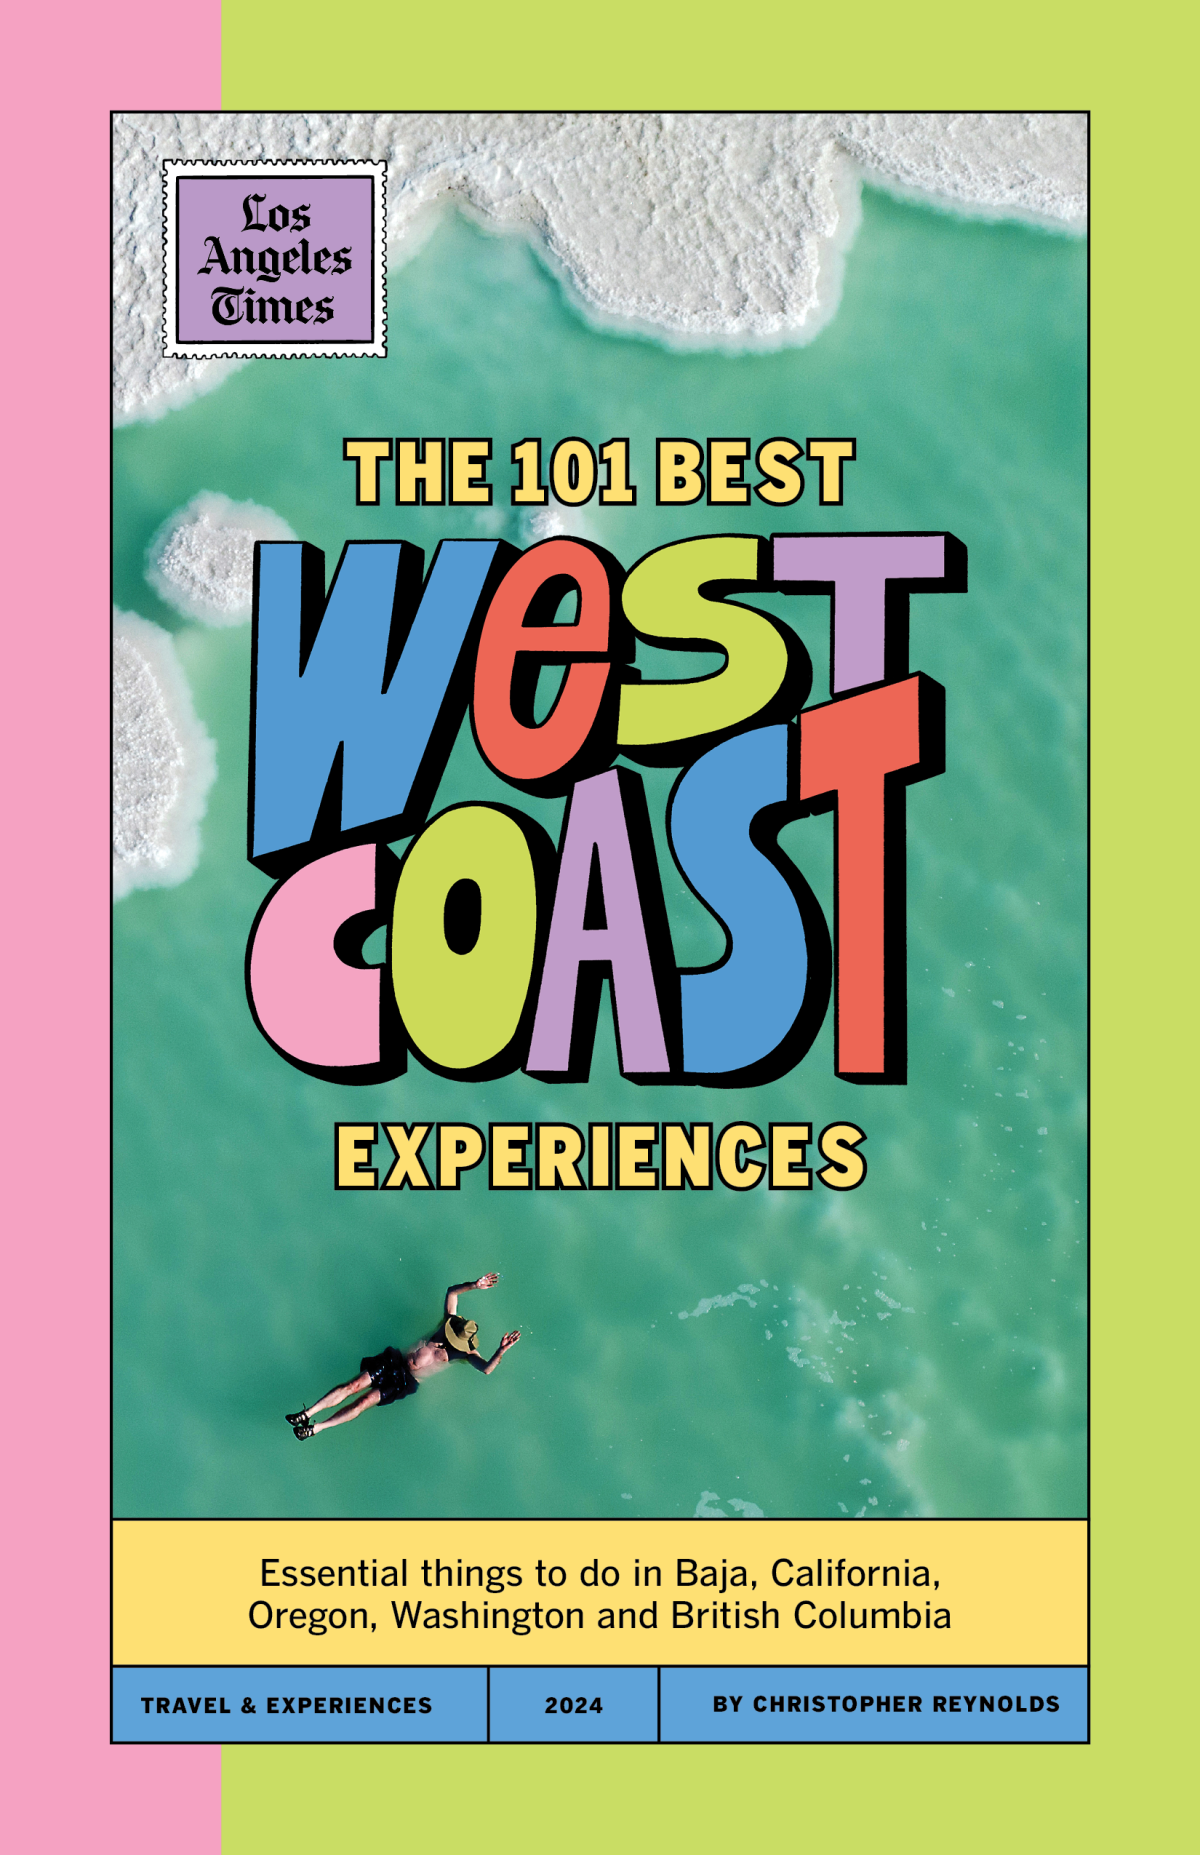 Cover of The 101 Best West Coast Experiences zine.